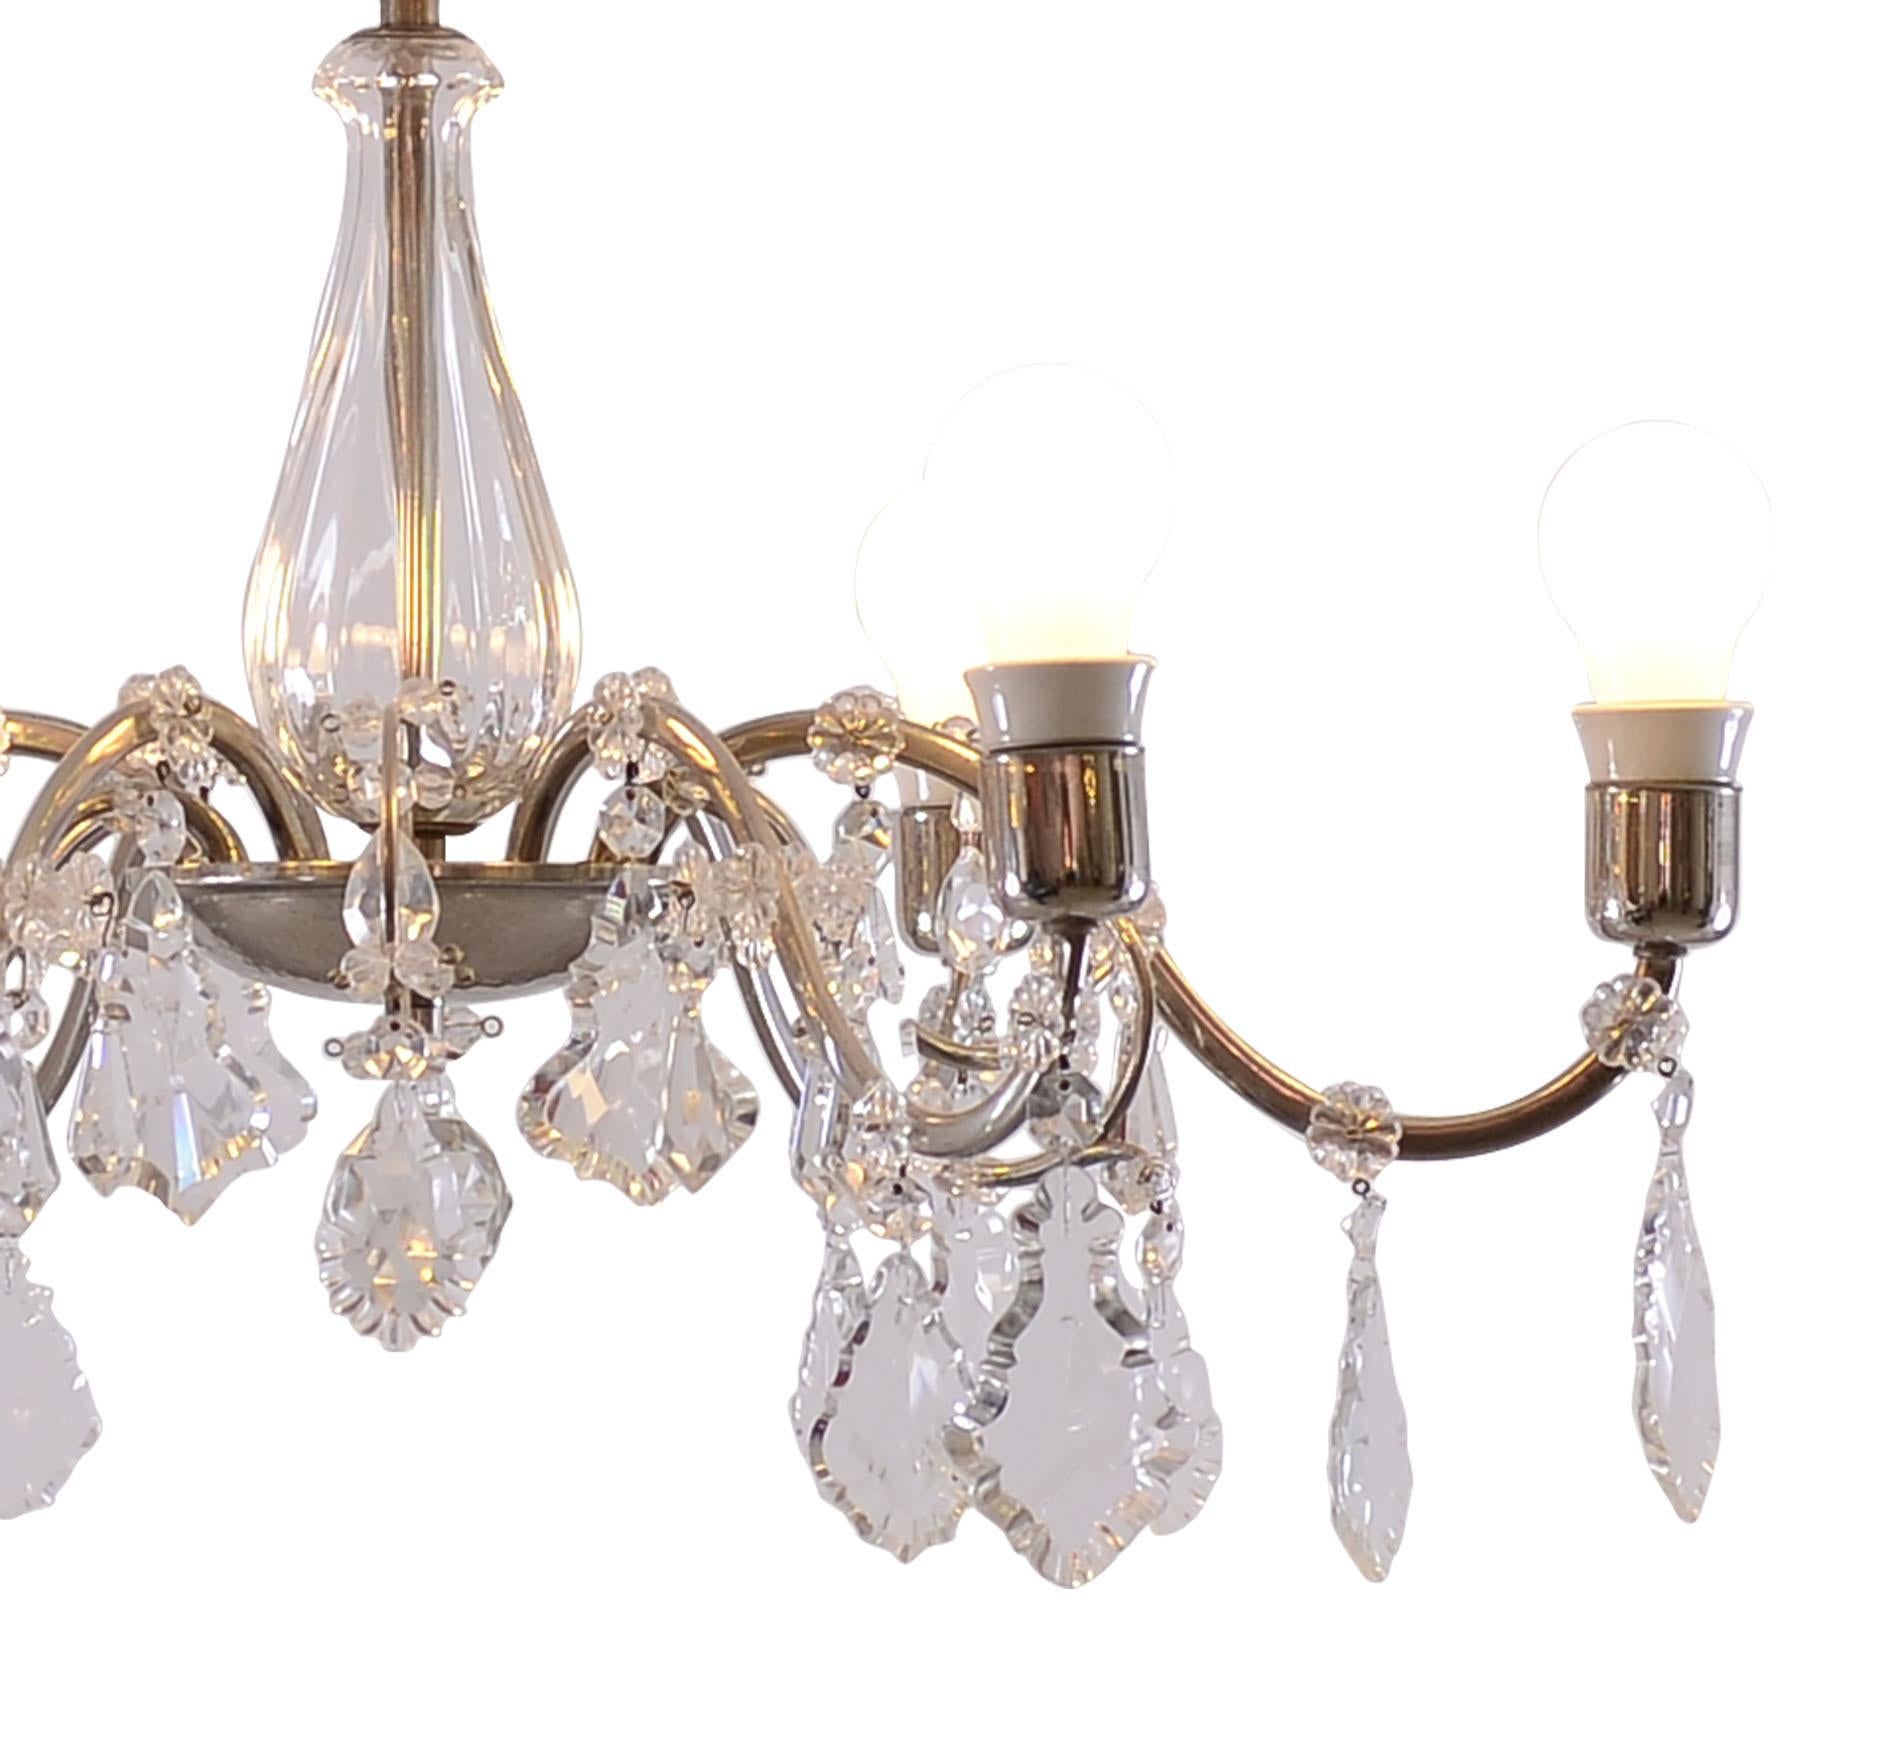 Hand-Crafted Original Mid-Century Modern Brass and Crystal Glass Chandelier For Sale